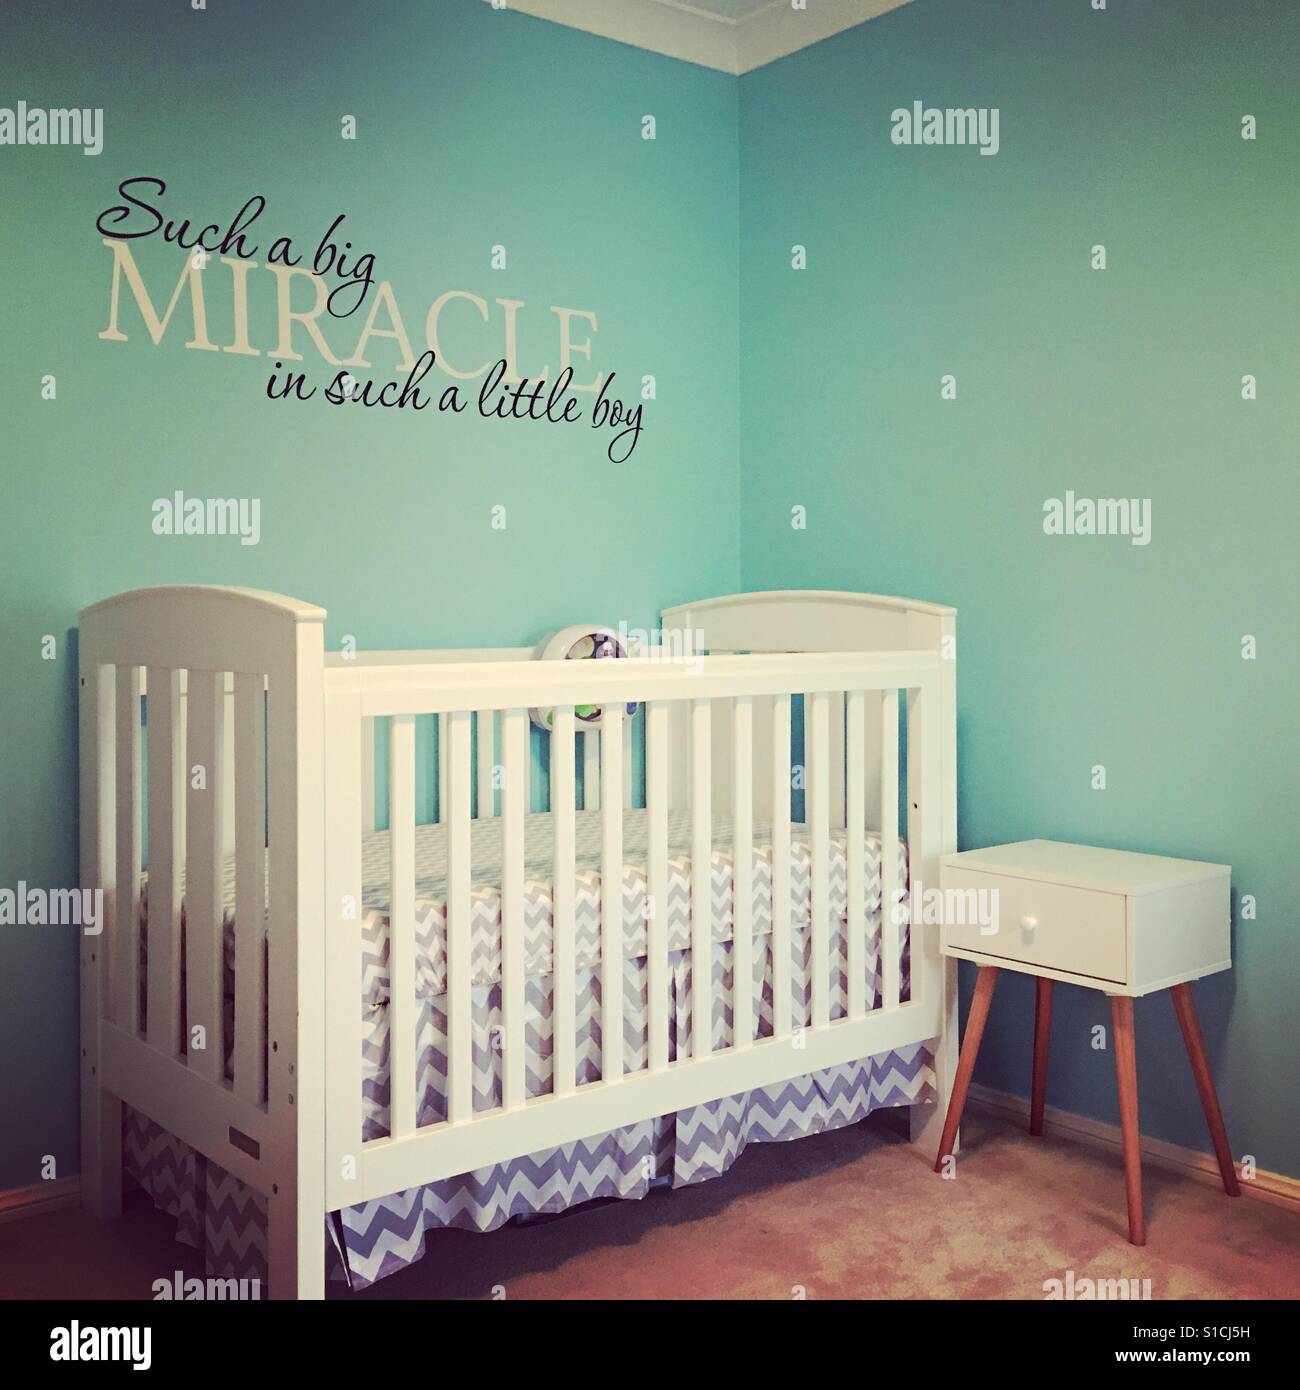 Such a big miracle in such a little boy Stock Photo